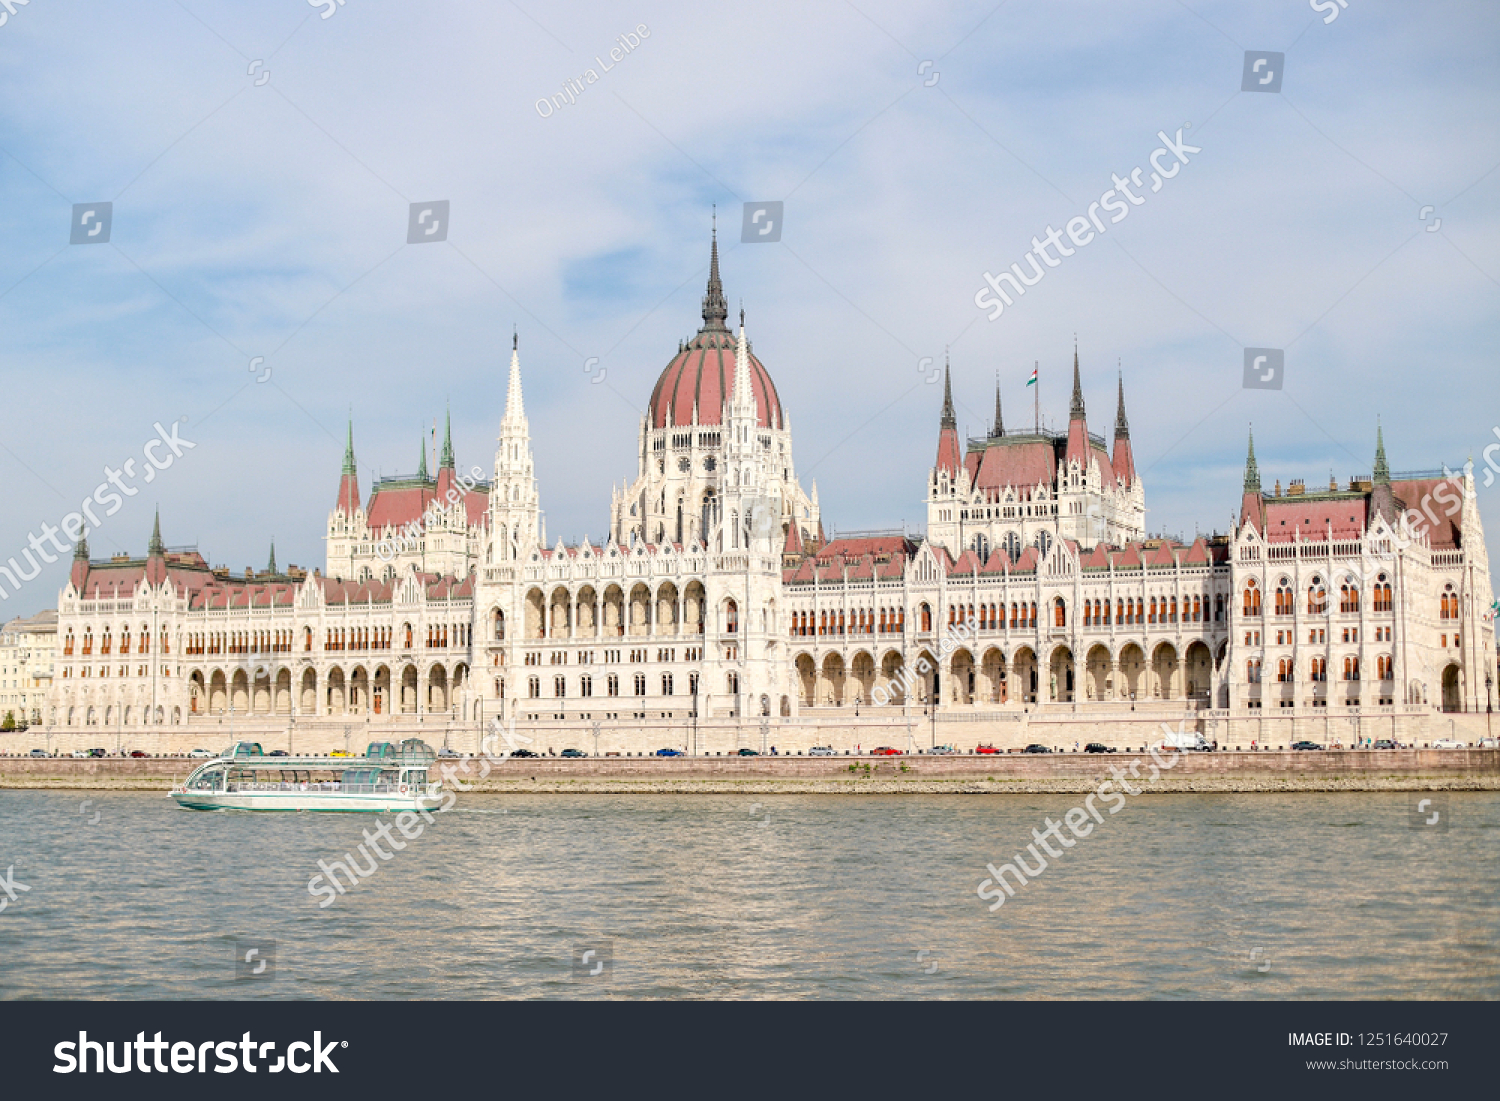 Hungarian parliament water front on a sunny day with blue sky and cloud